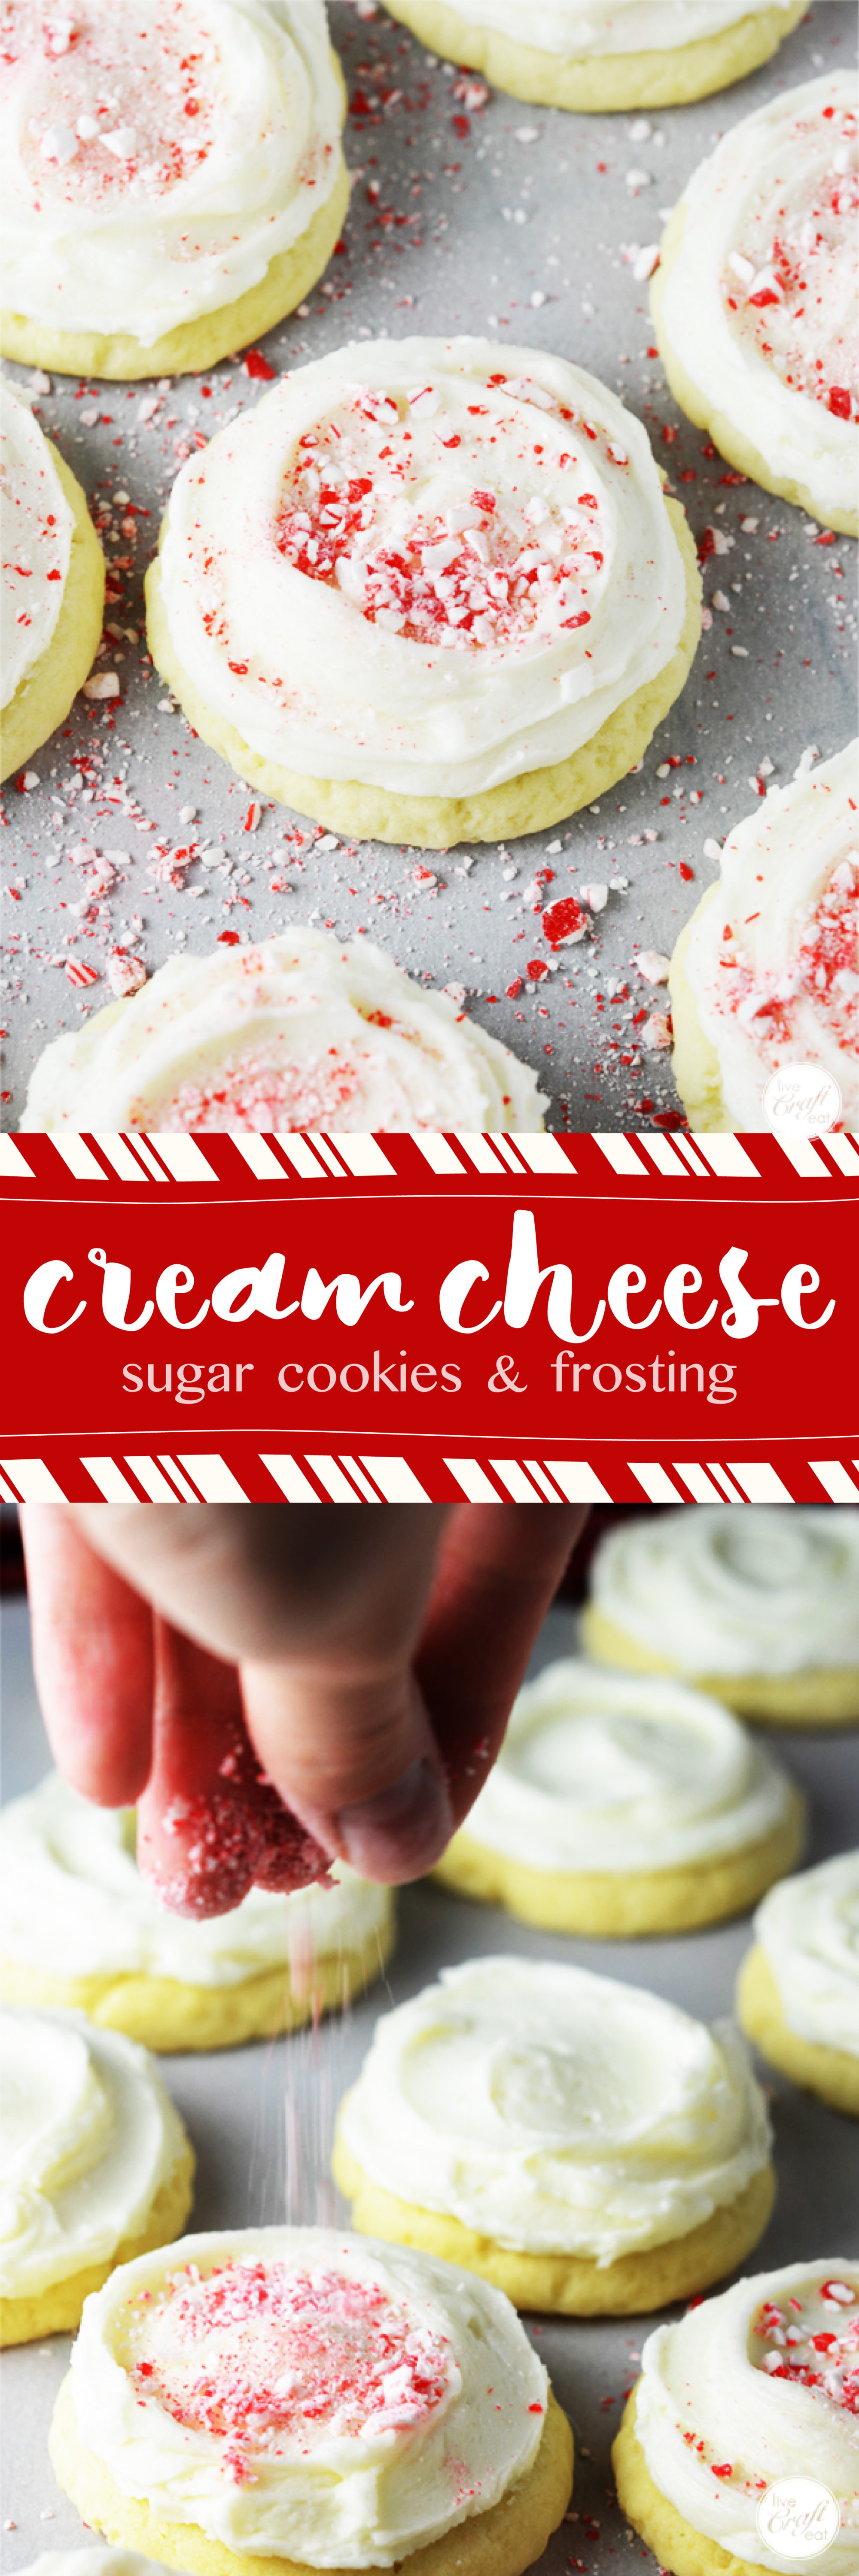 cream cheese sugar cookies & cream cheese frosting...deliciously soft as is, but add some chopped nuts or crushed candy canes to make it the perfect christmas cookie for santa, neighbors, cookie exchanges, or yourself!!!